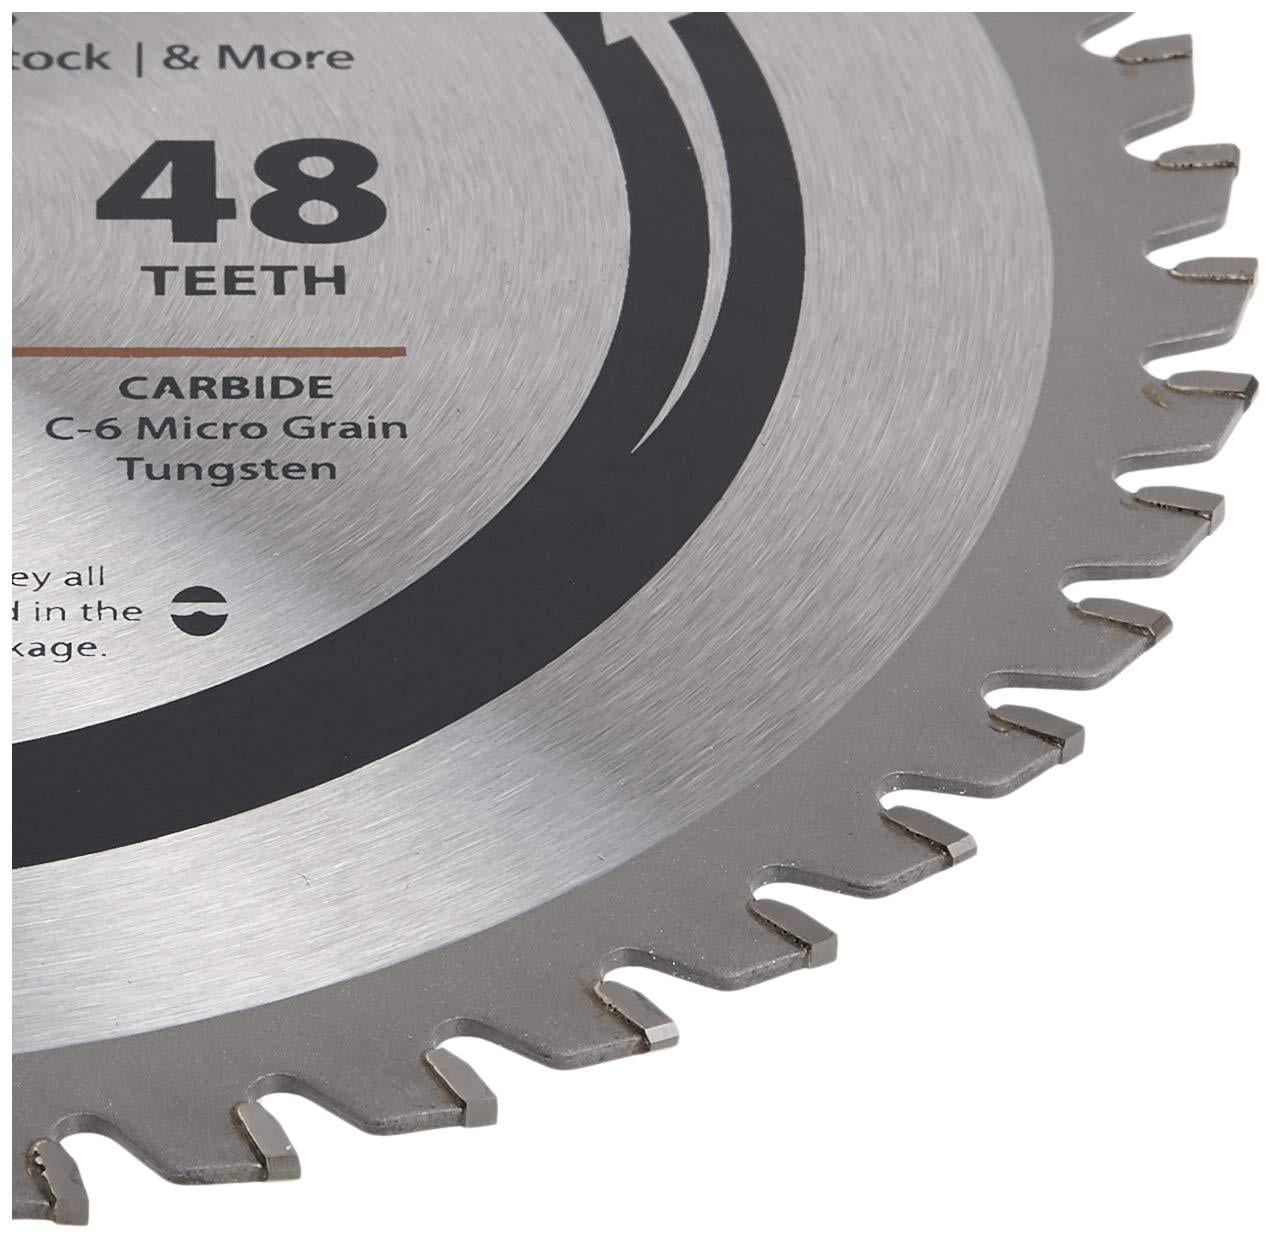 Oshlun Sbf-072536 7-1 4-inch 36 Tooth TCG Saw Blade for sale online